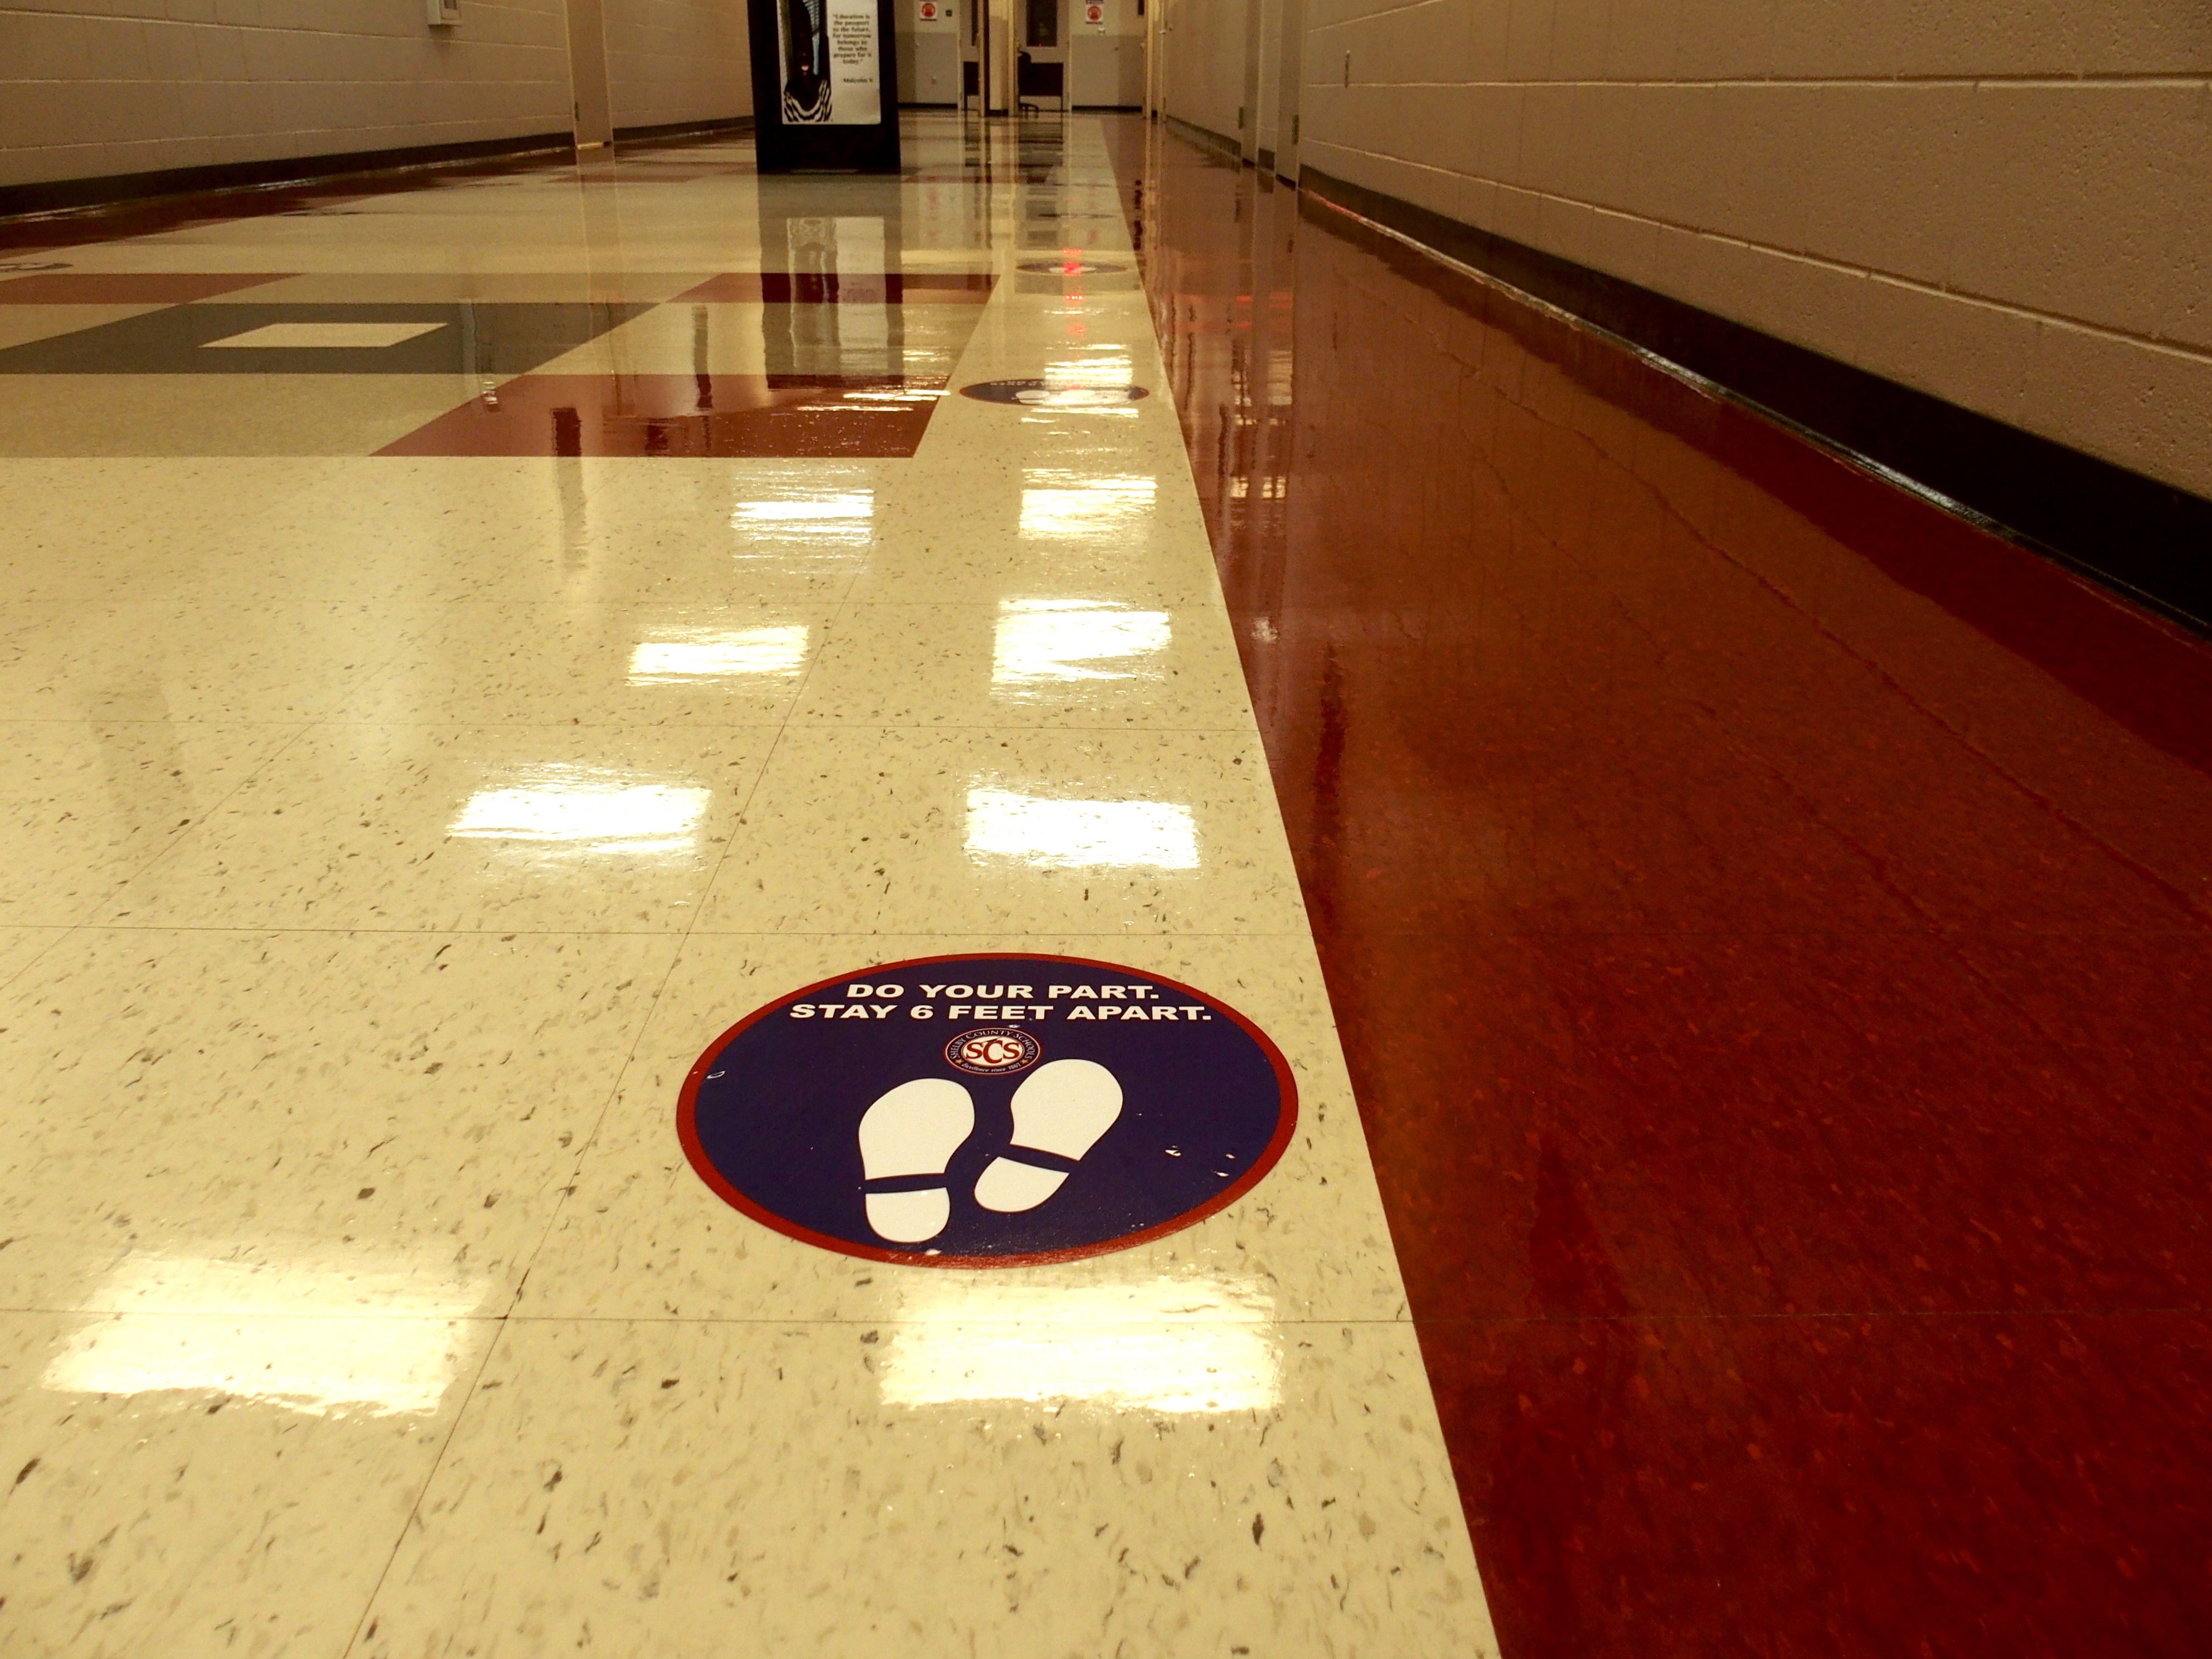 A sticker urging social distancing was placed in a school building hallway